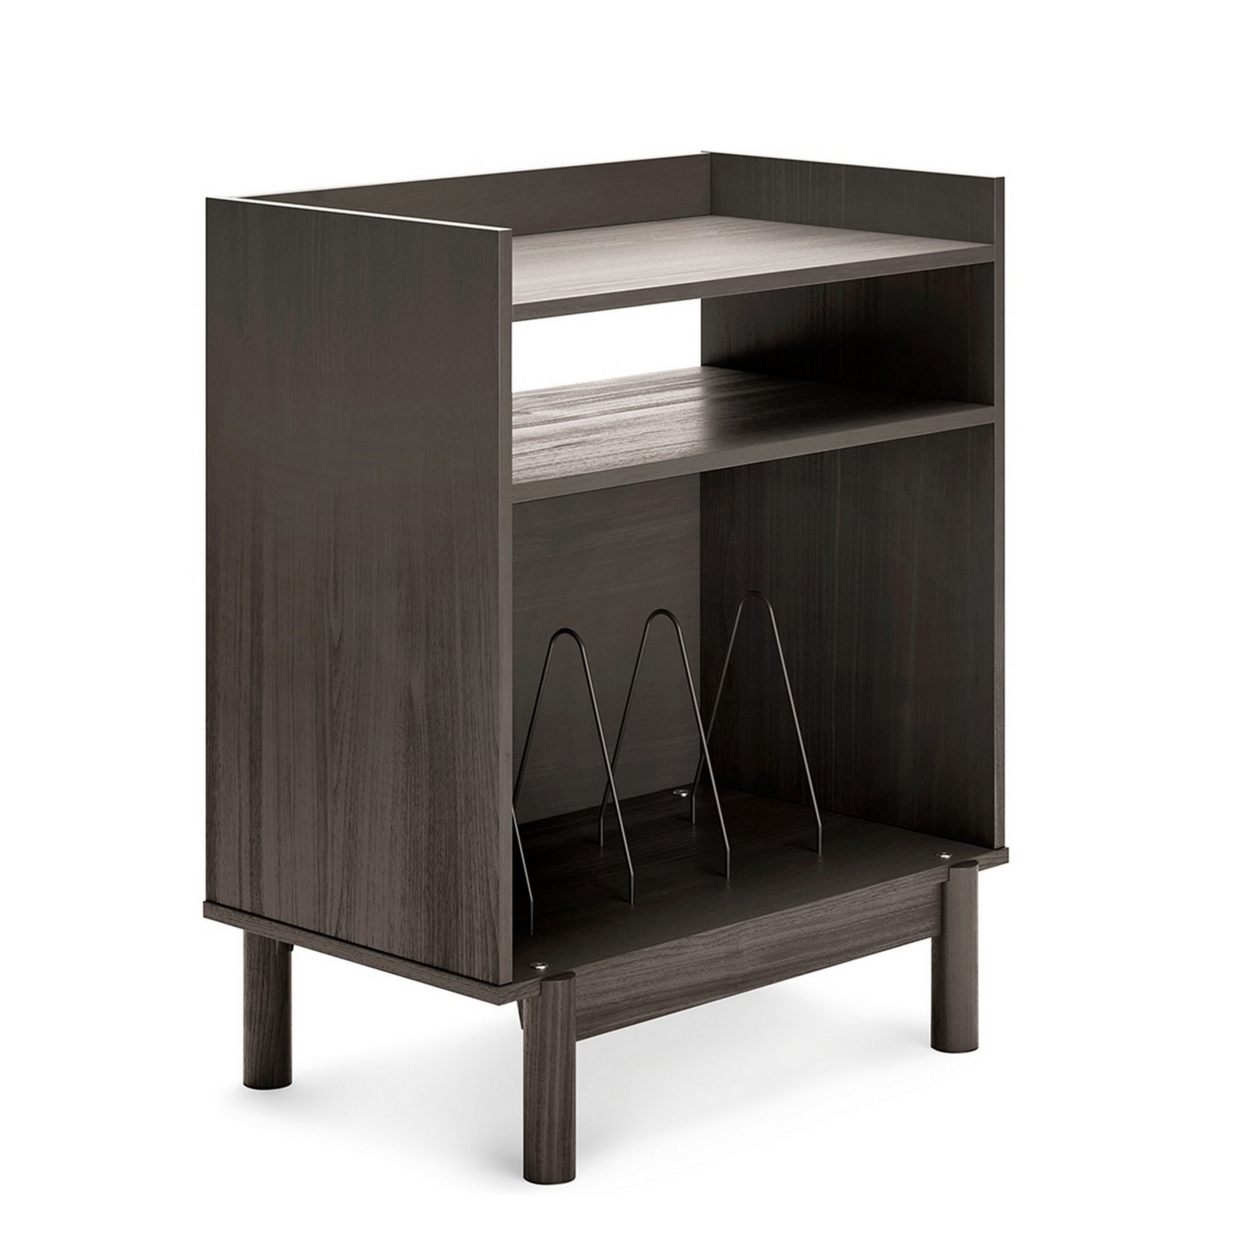 33 Inch Wood Turntable Accent Console, Open Shelves, Four Dividers, Gray- Saltoro Sherpi